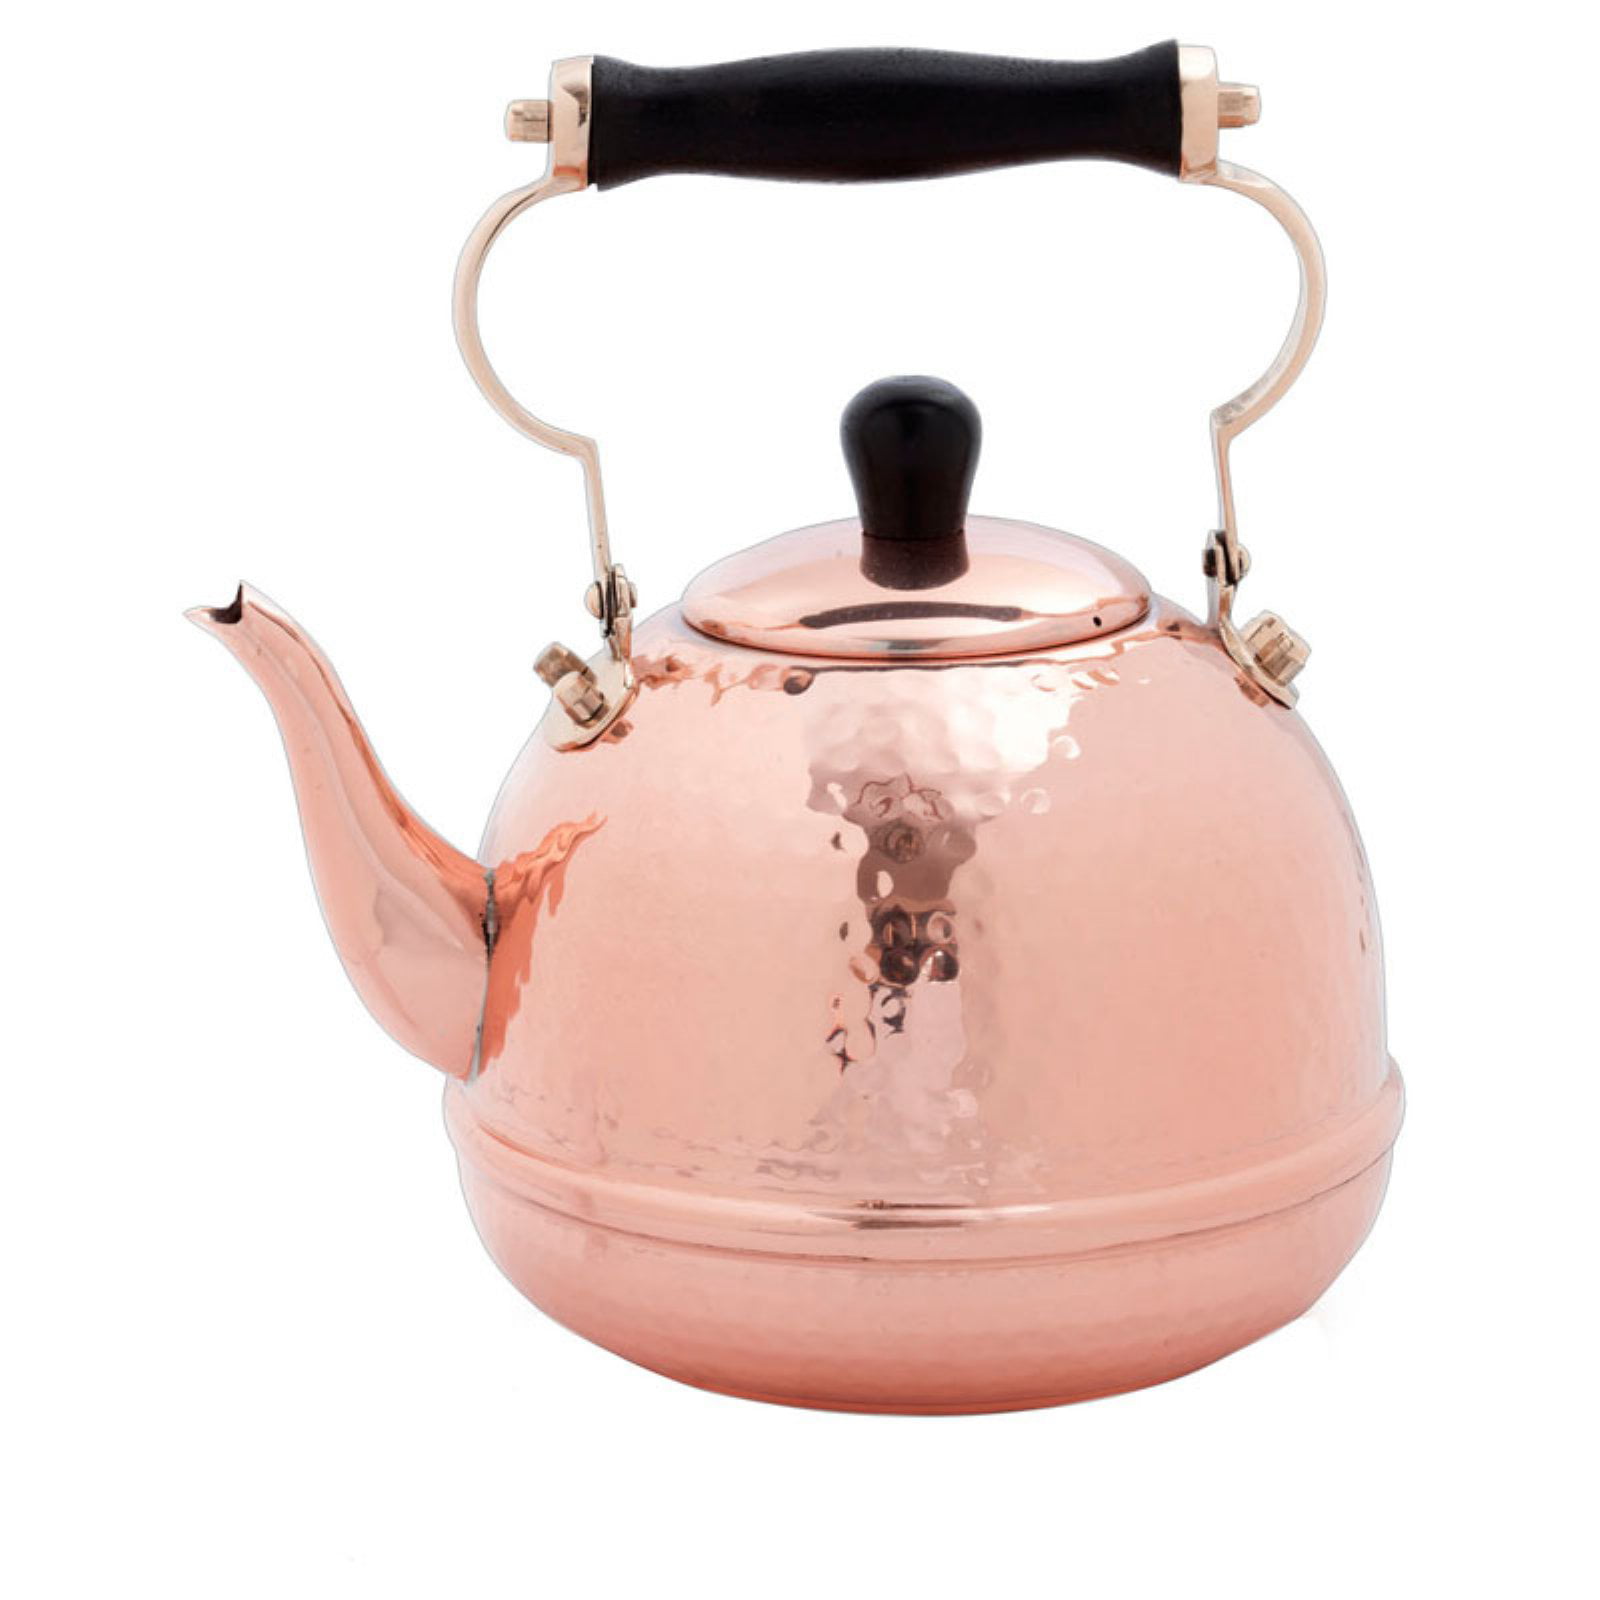 1.2 L S S Coper Plated Arabic Teapot - Copper Plated Stainless Steel Tea  Kettle Teapot Stovetop - No-Rust Quick Heat Distribution, for Home Kitchen,  Metallic Copper Color